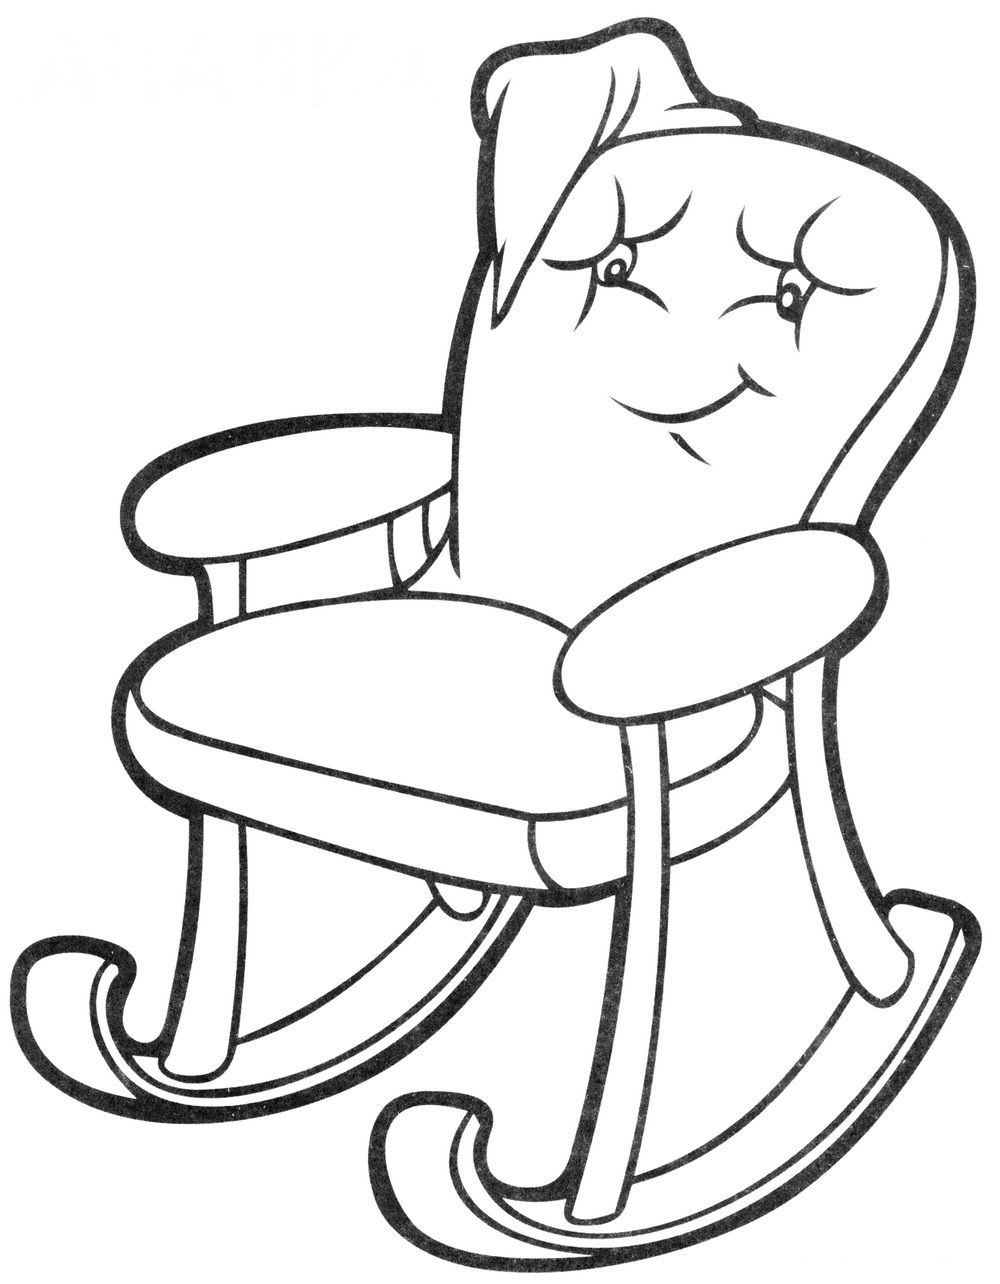 Furniture coloring page for kids to print and download for ...